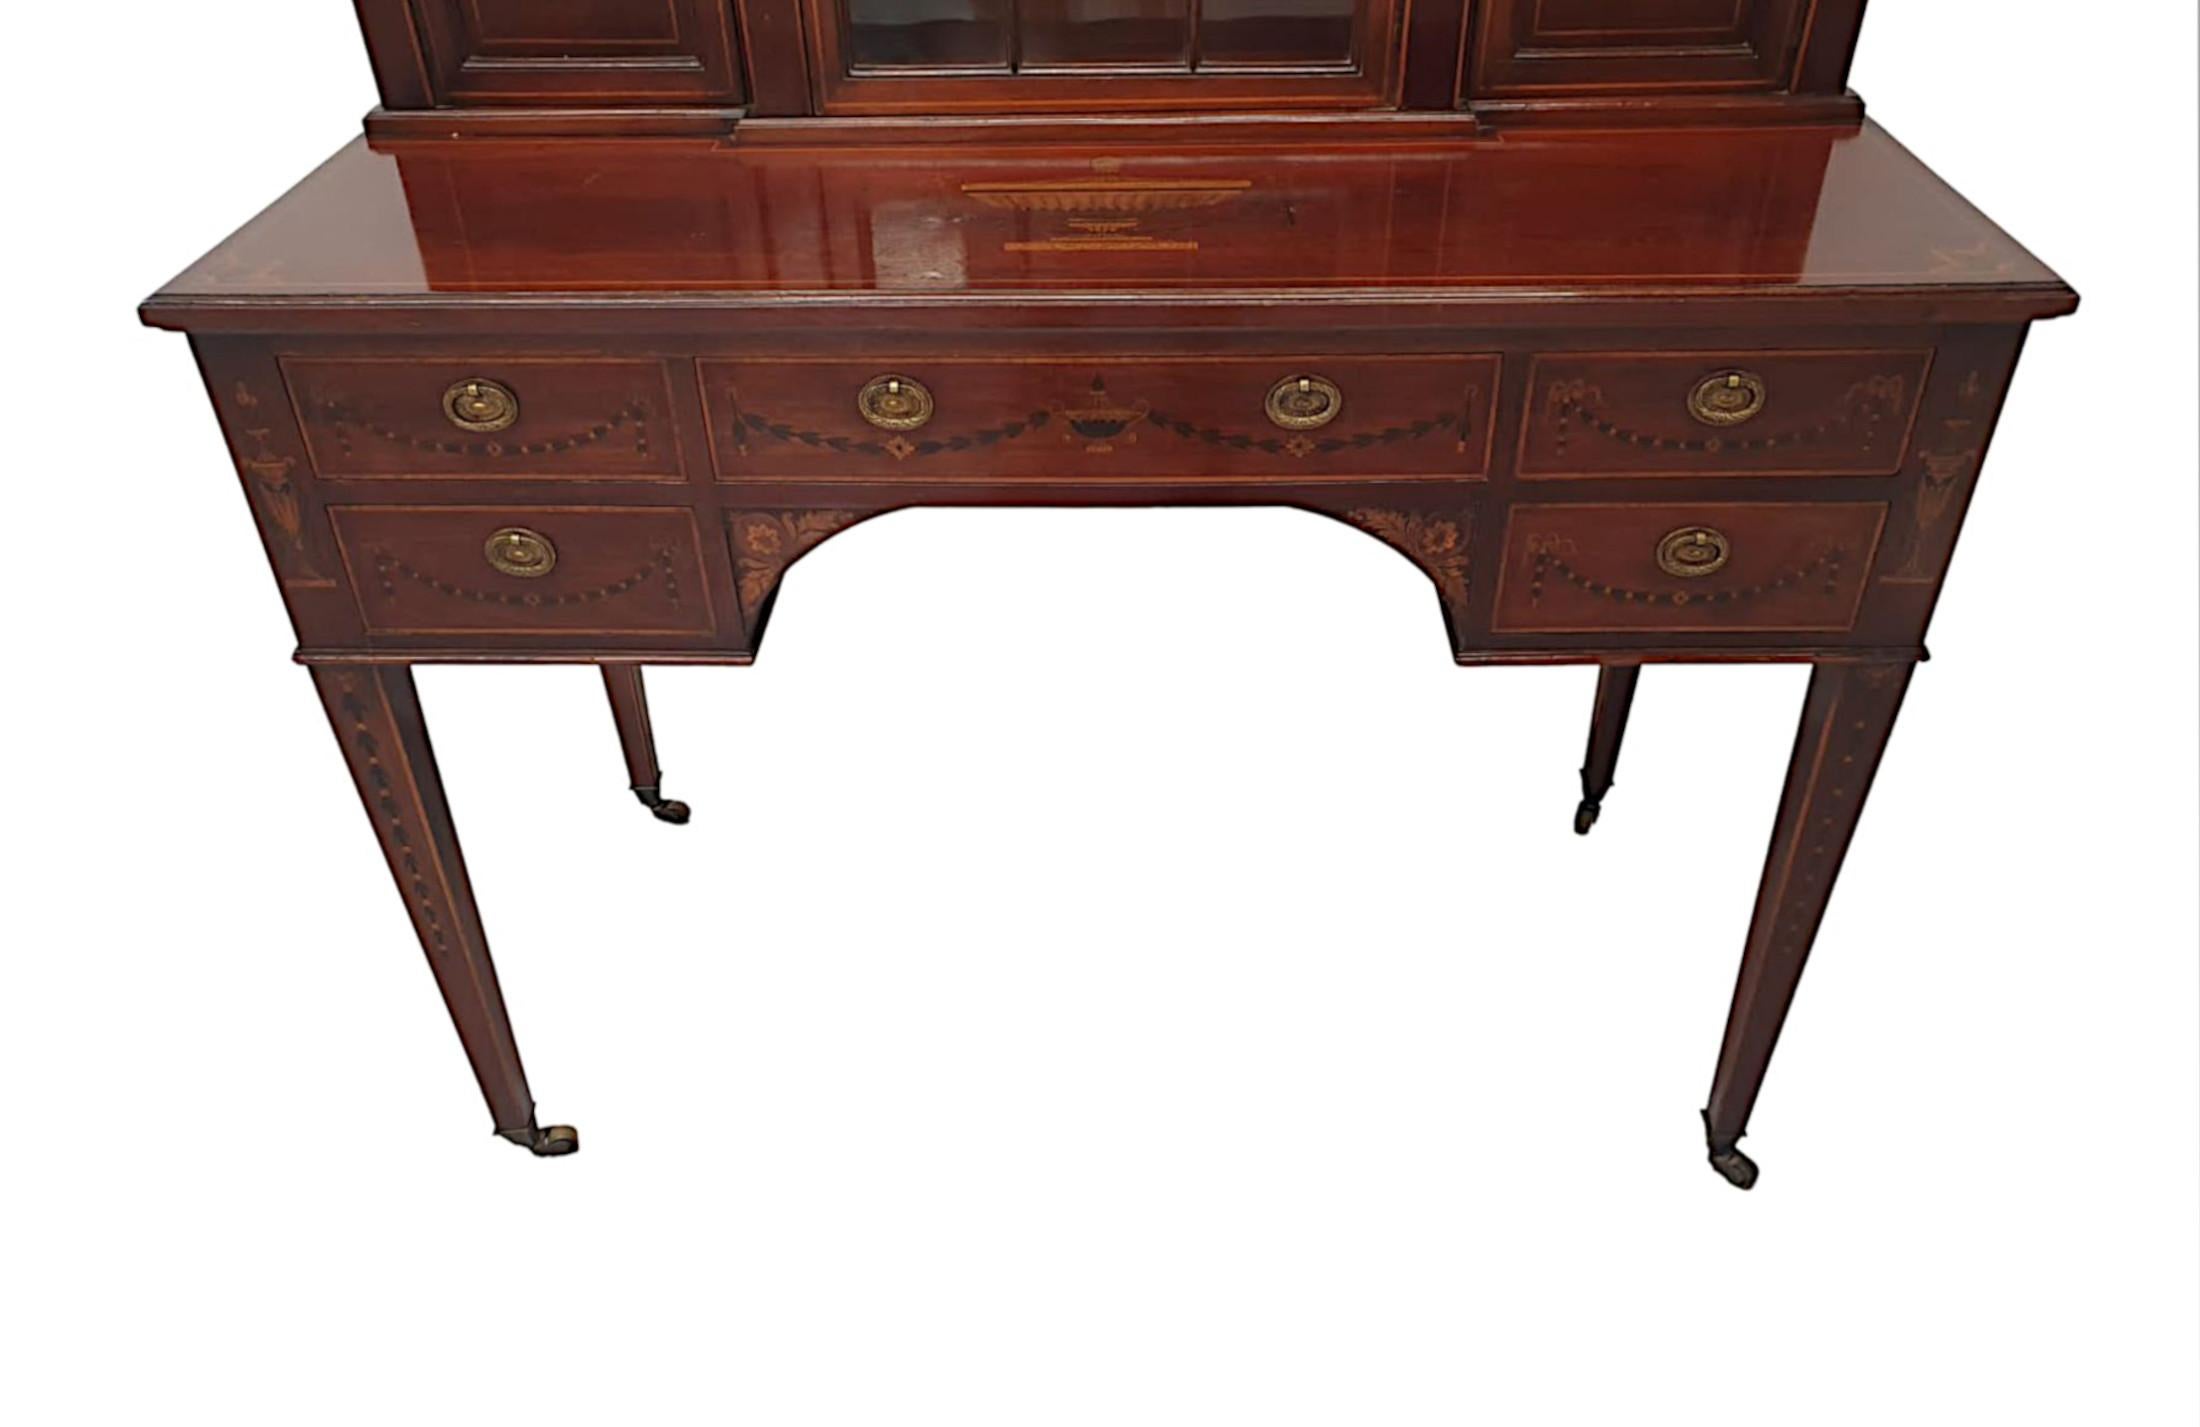 Very Fine Edwardian Marquetry Inlaid Table or Cabinet by Shoolbred of London For Sale 5